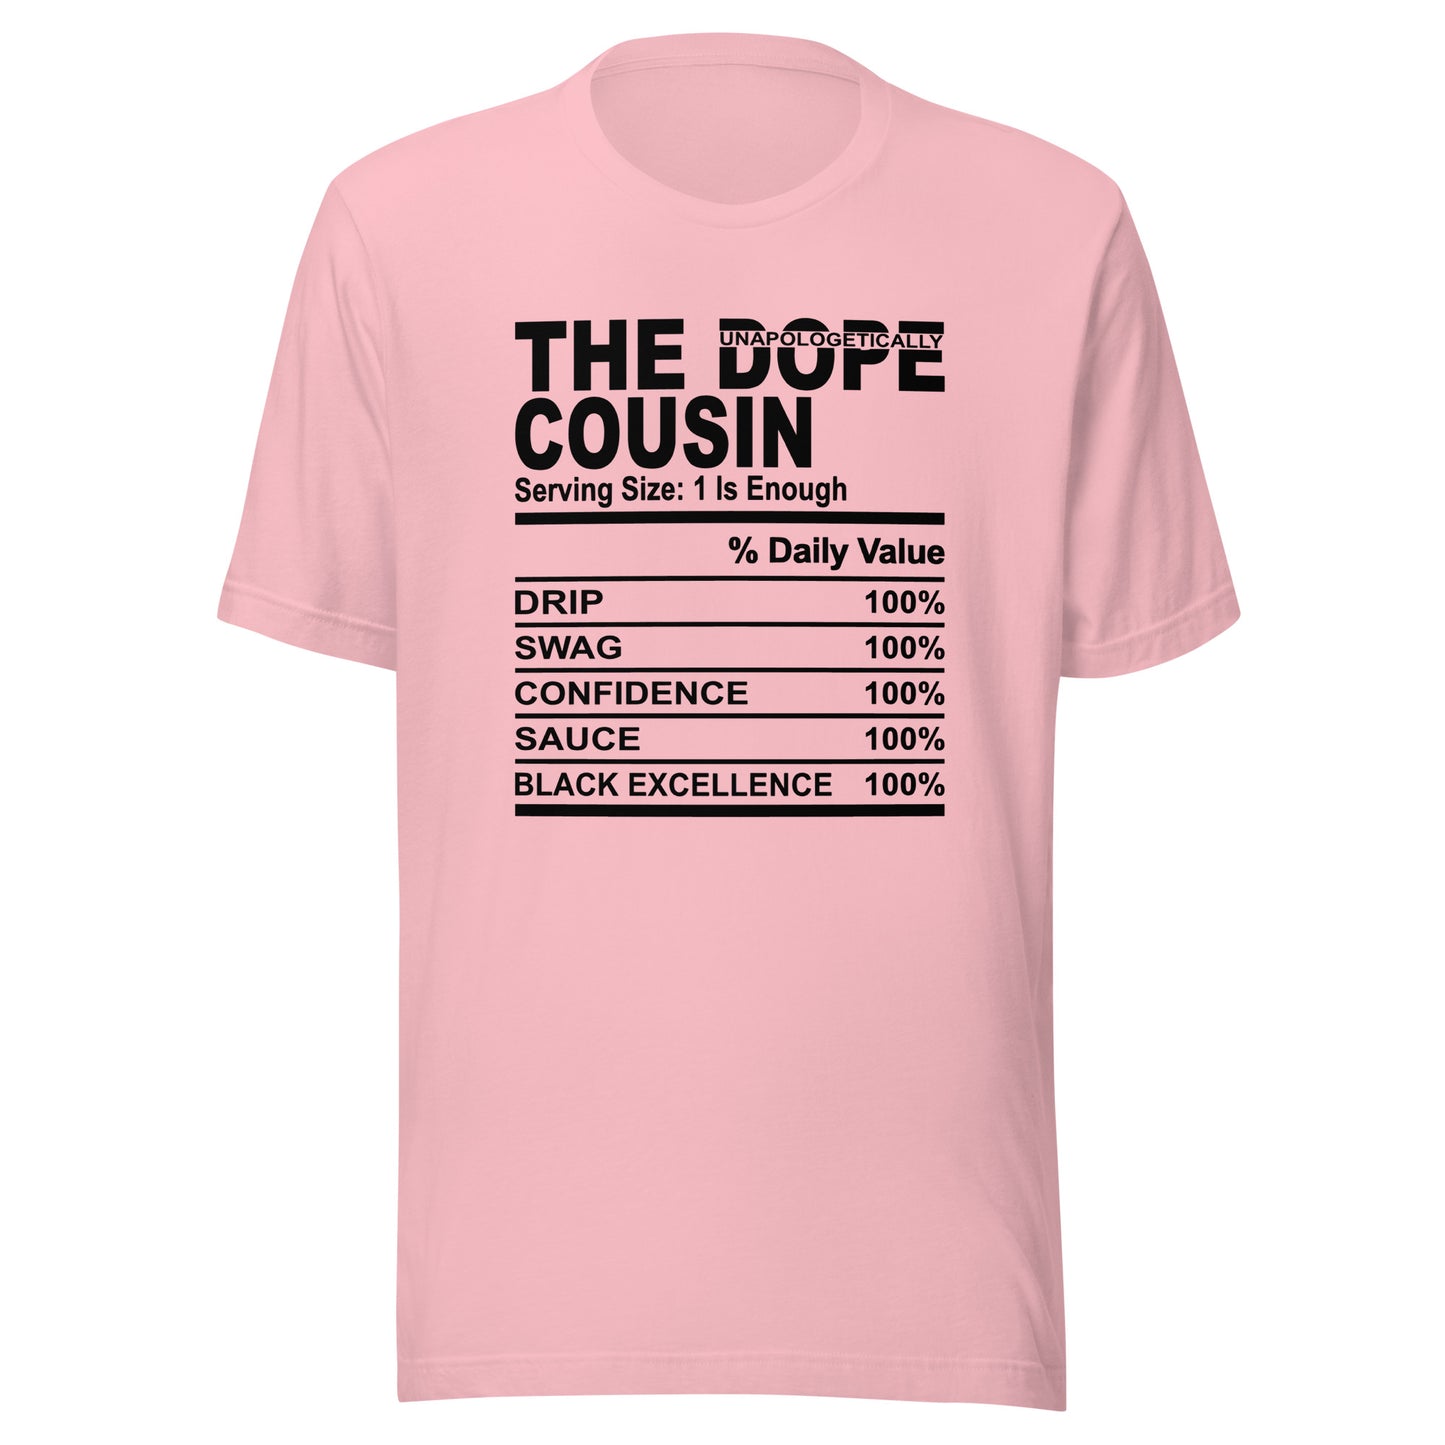 THE DOPE COUSIN (Unapologetically)- S-M - Unisex T-Shirt (black print)